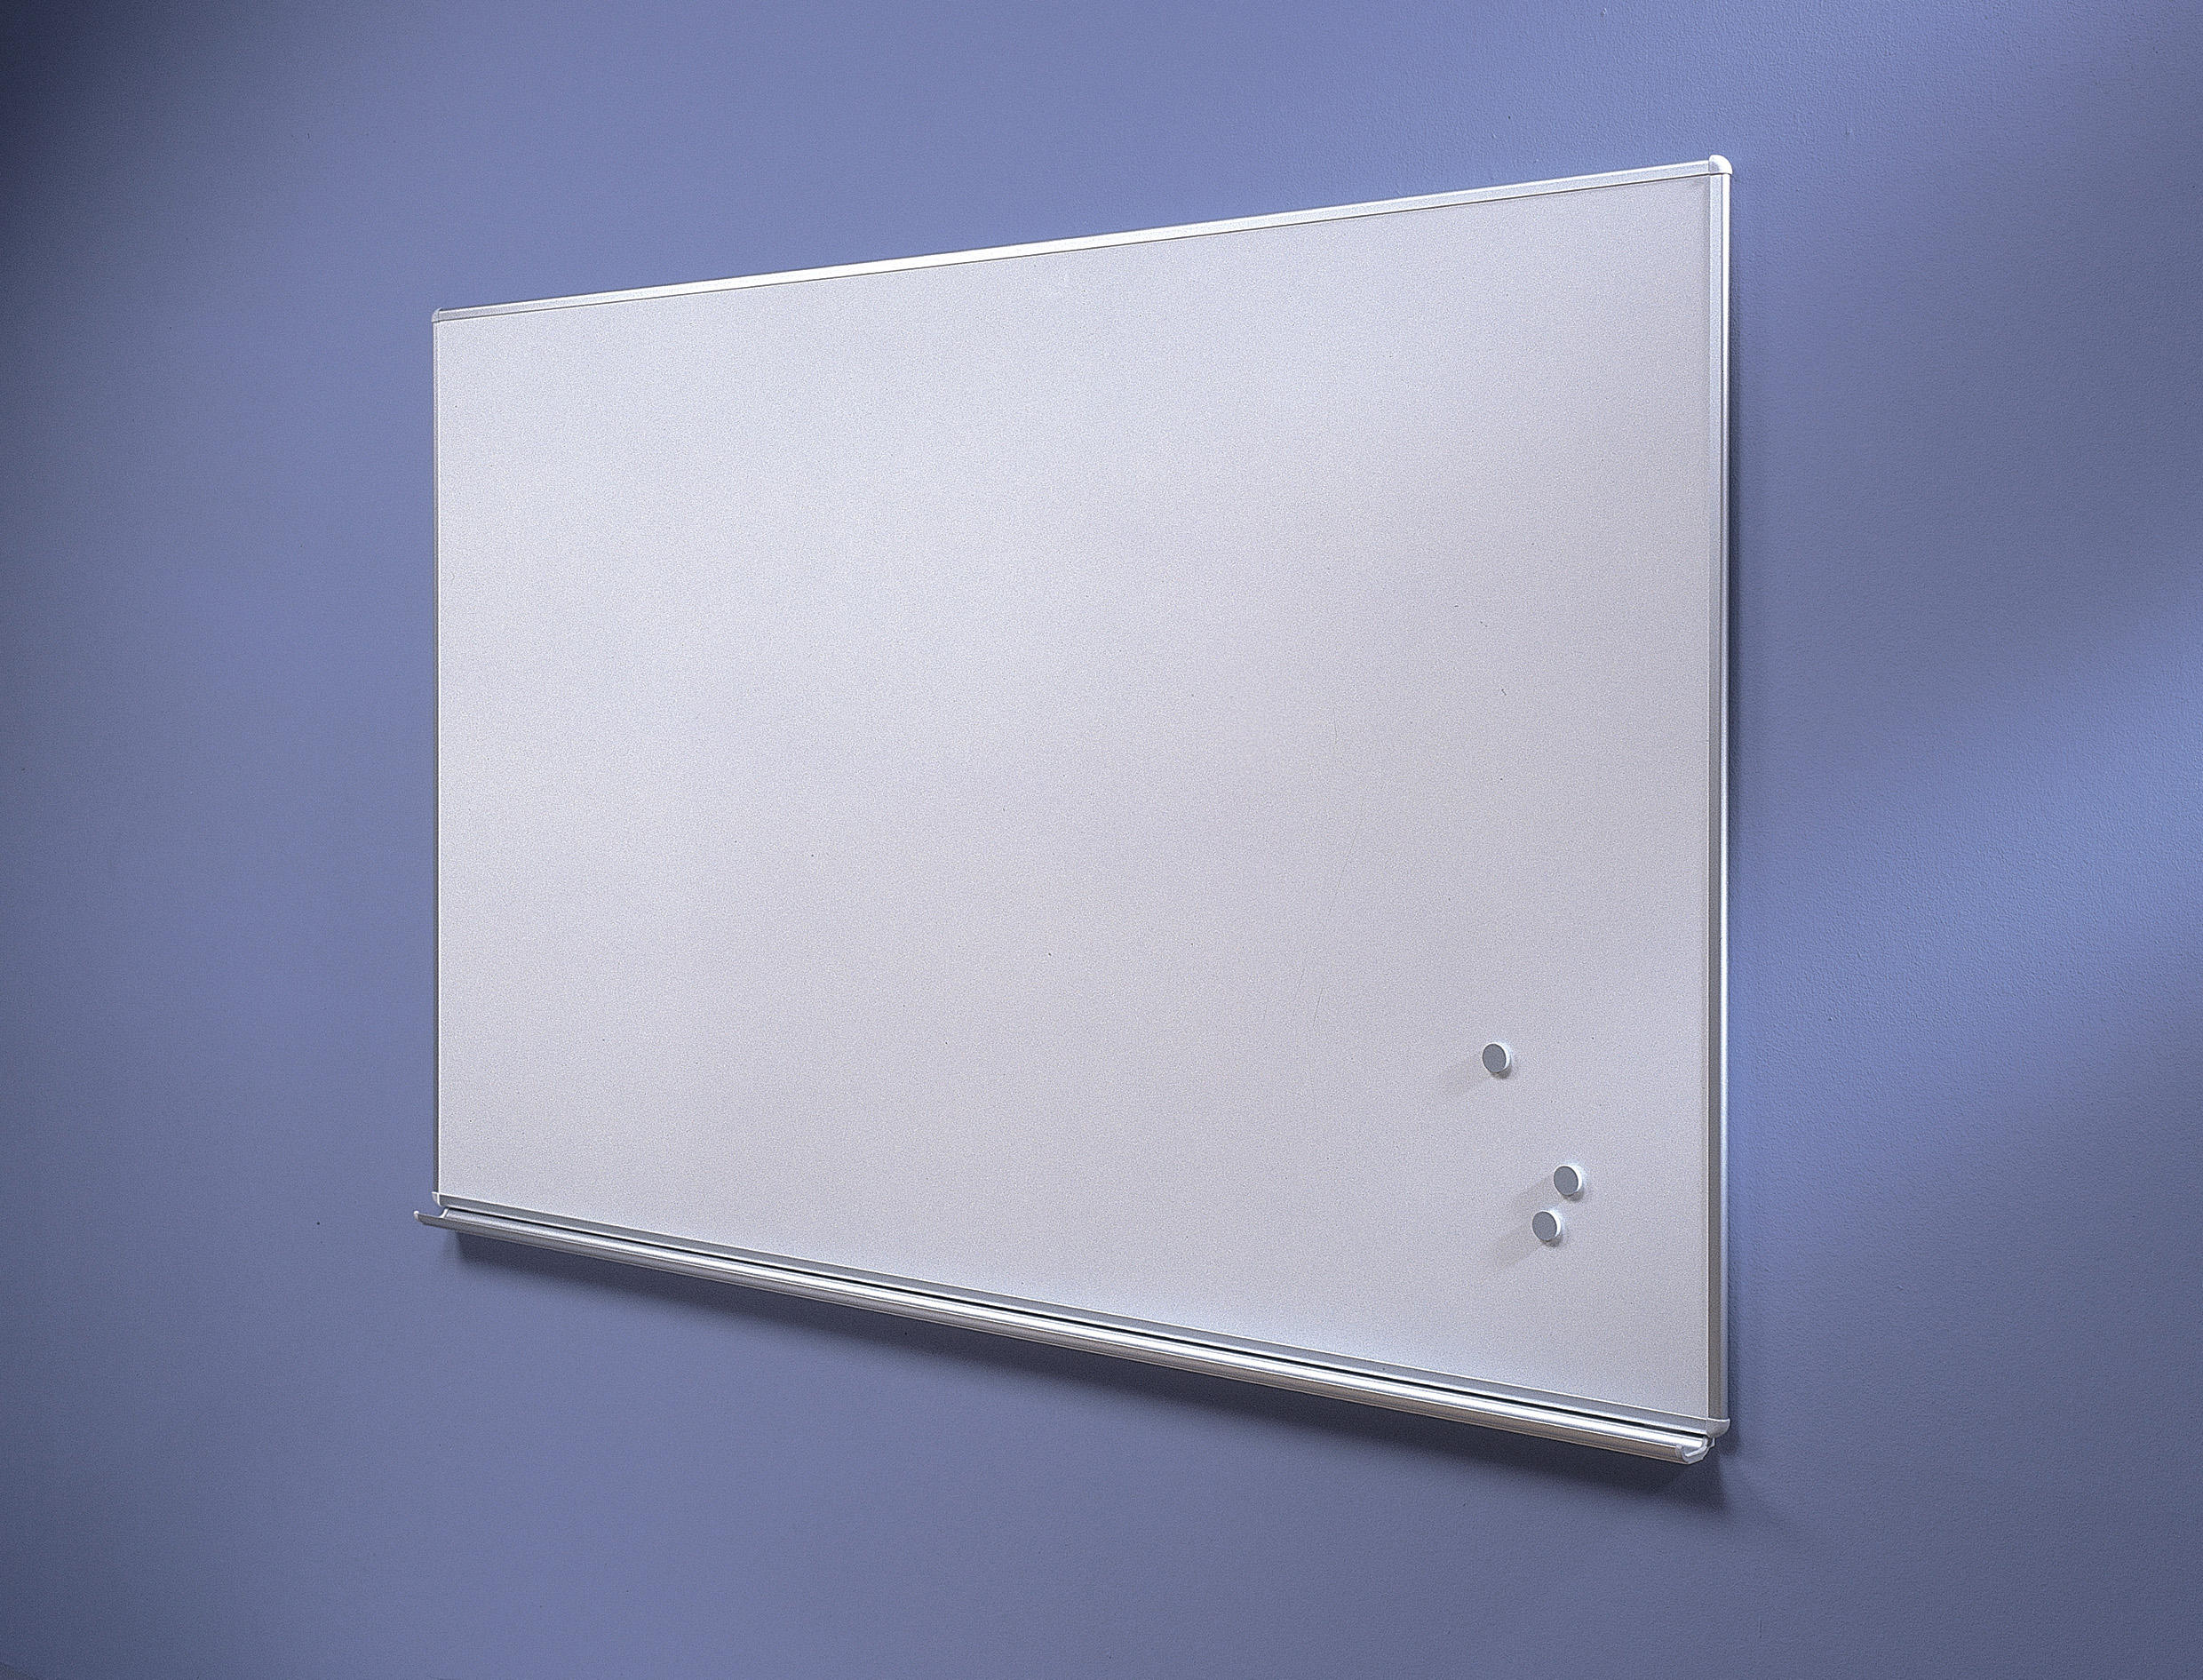 Whiteboard - High quality designer products | Architonic